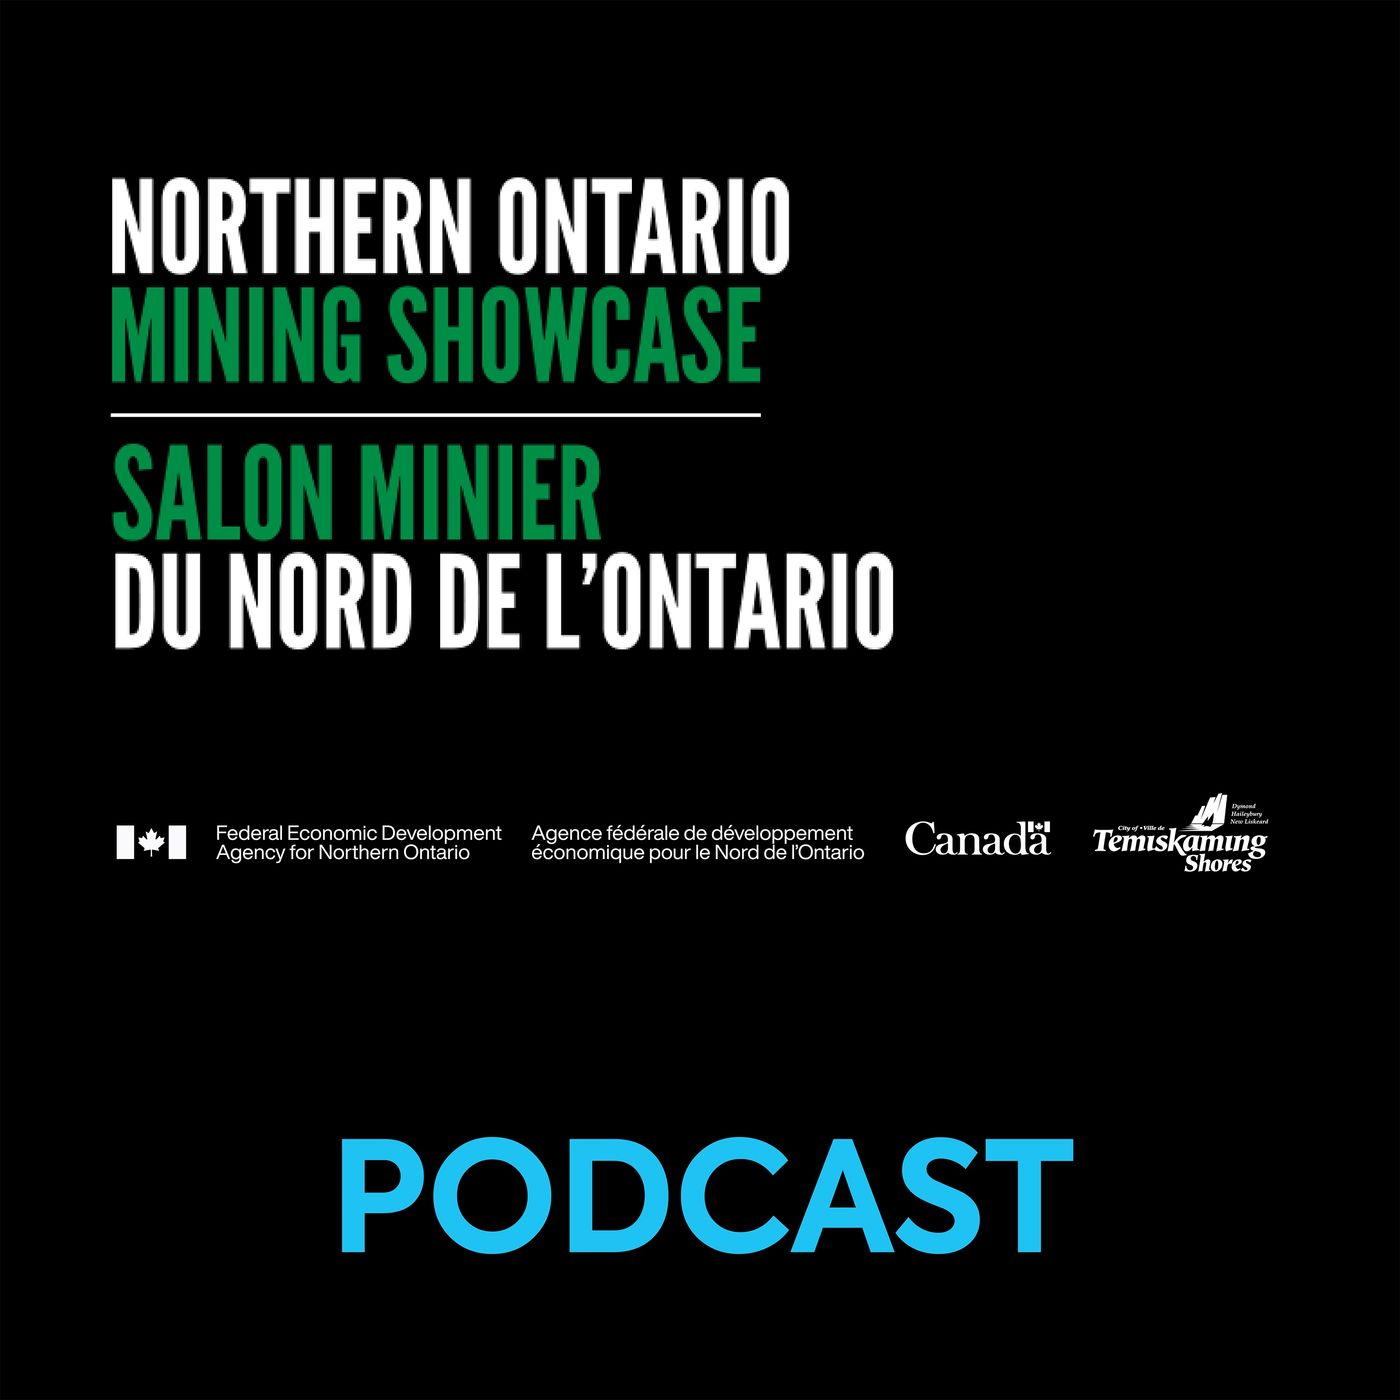 Northern Ontario Mining Showcase  Podcast - NOMS Podcast